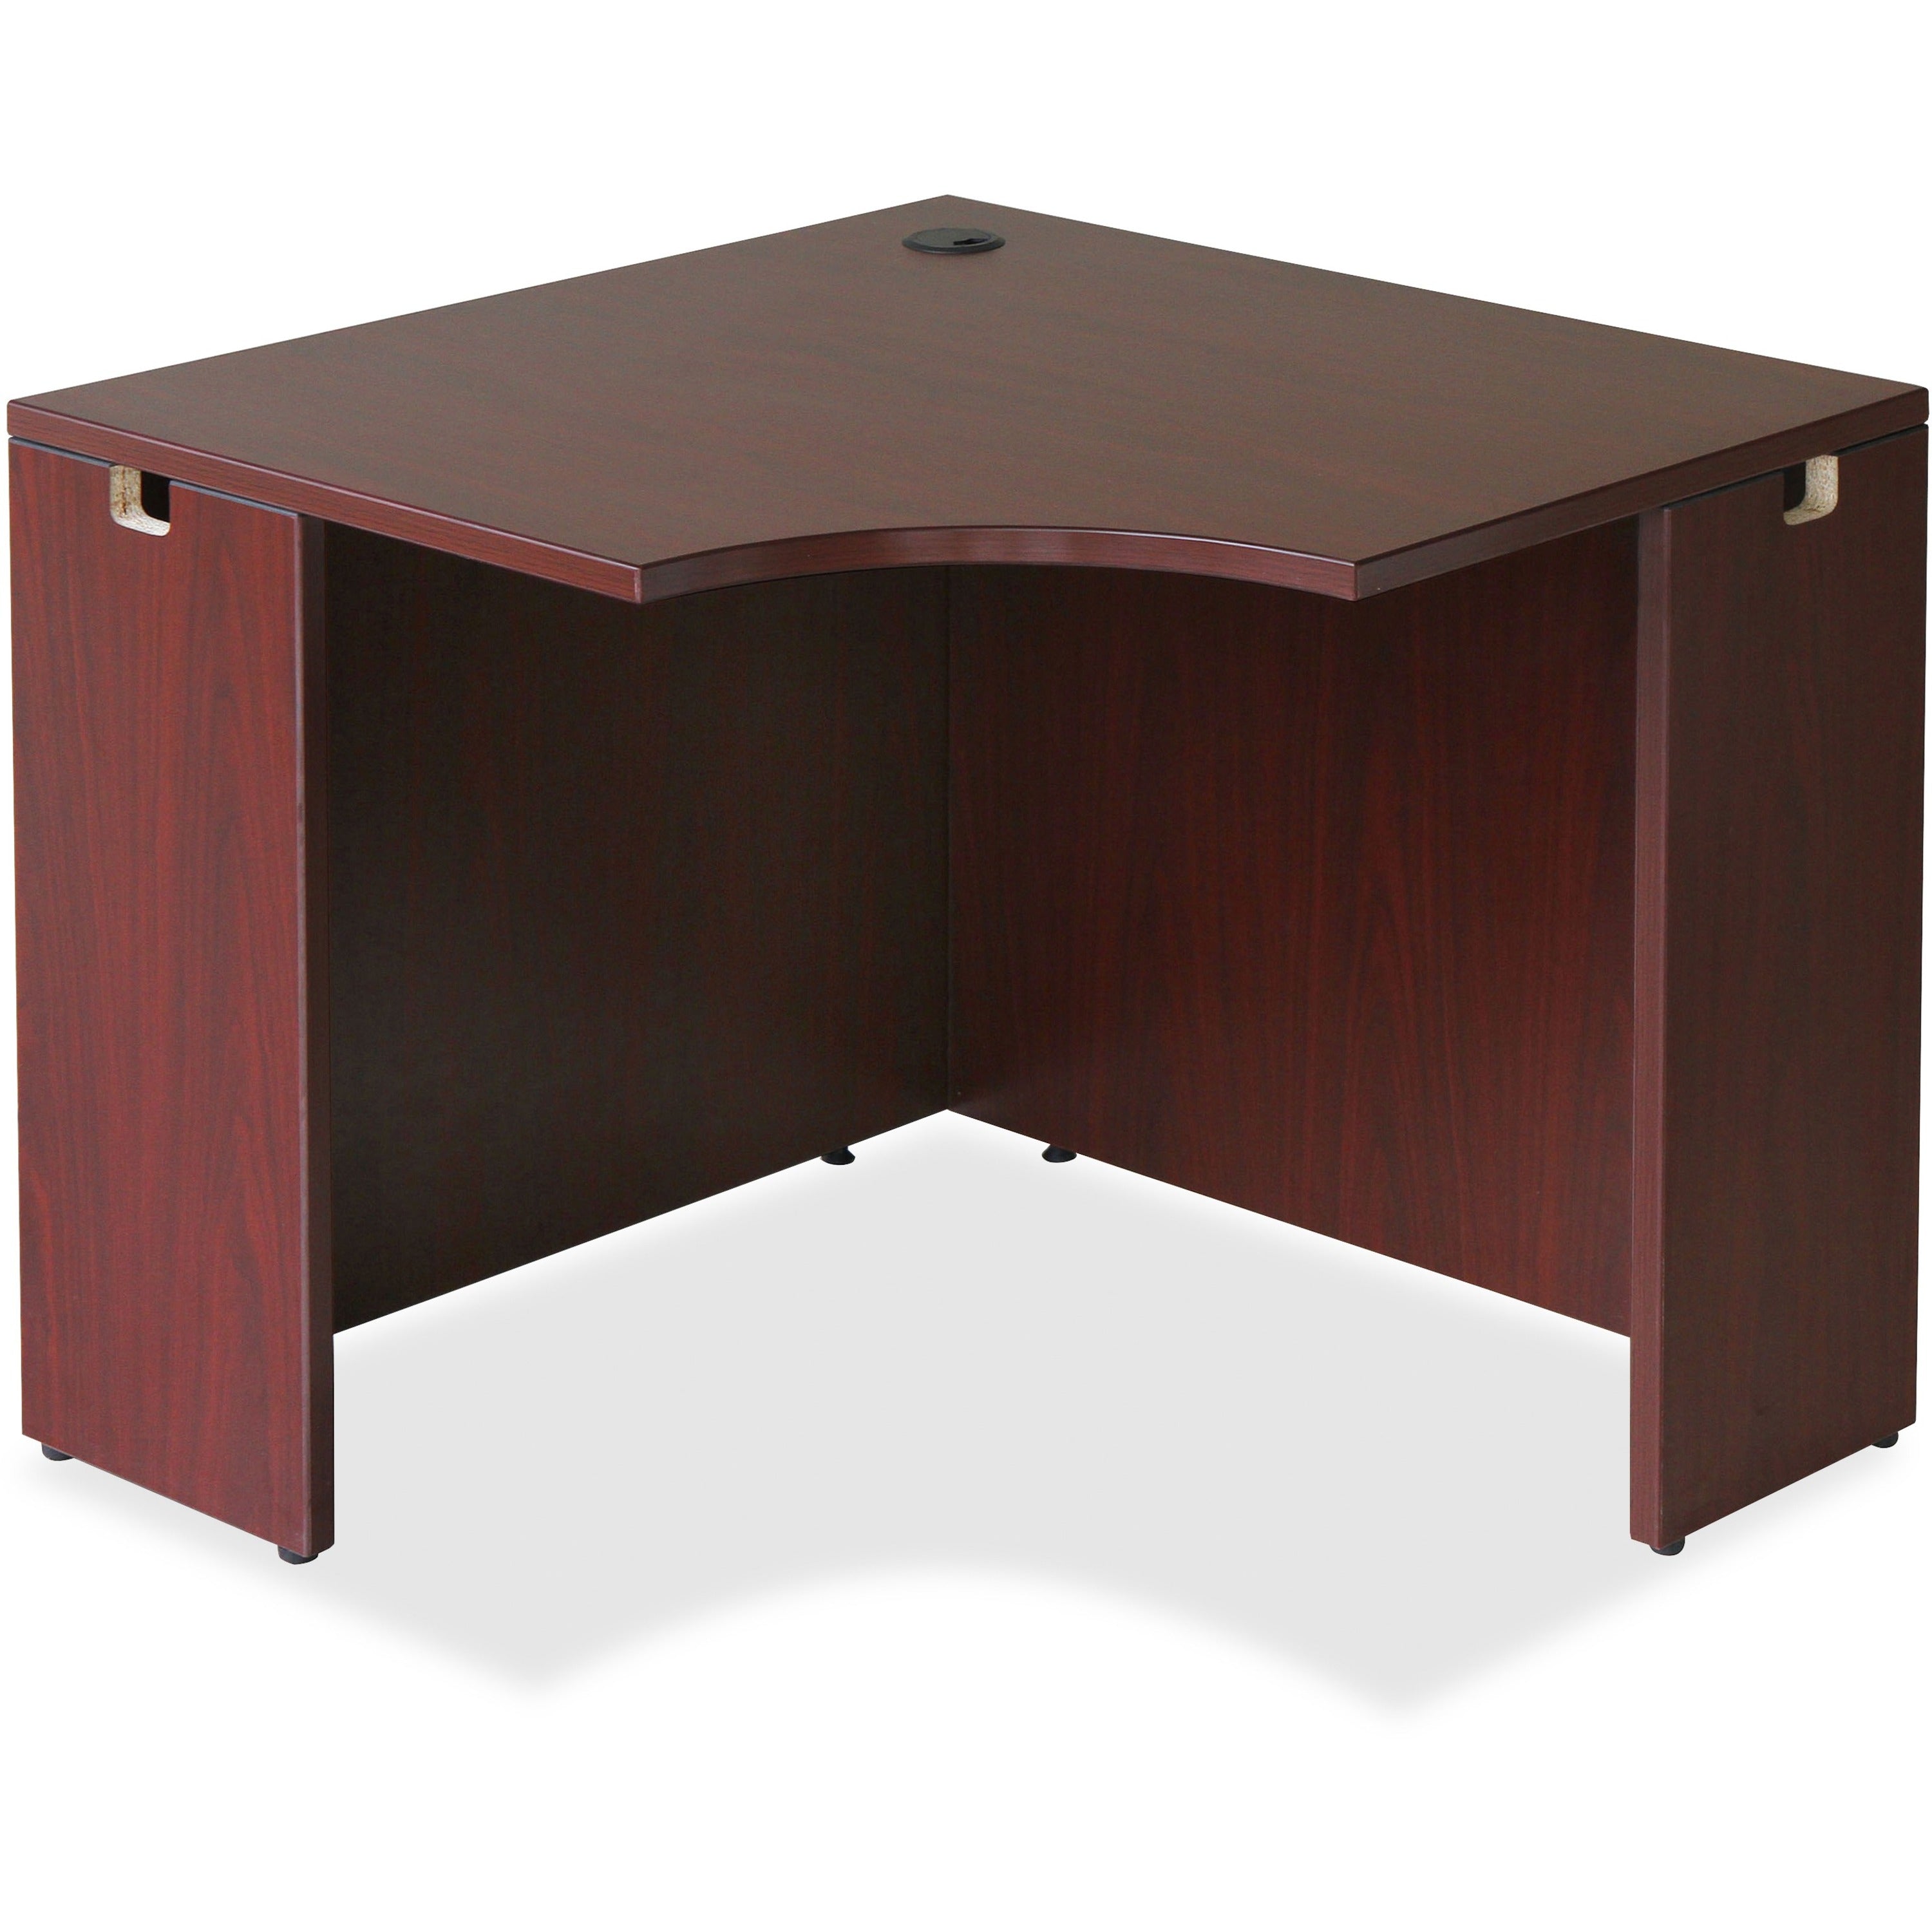 lorell-essentials-series-corner-desk-for-table-toplaminated-rectangle-mahogany-top-x-3538-table-top-width-x-3538-table-top-depth-x-1-table-top-thickness-2950-height-assembly-required-mahogany-1-each_llr69872 - 1